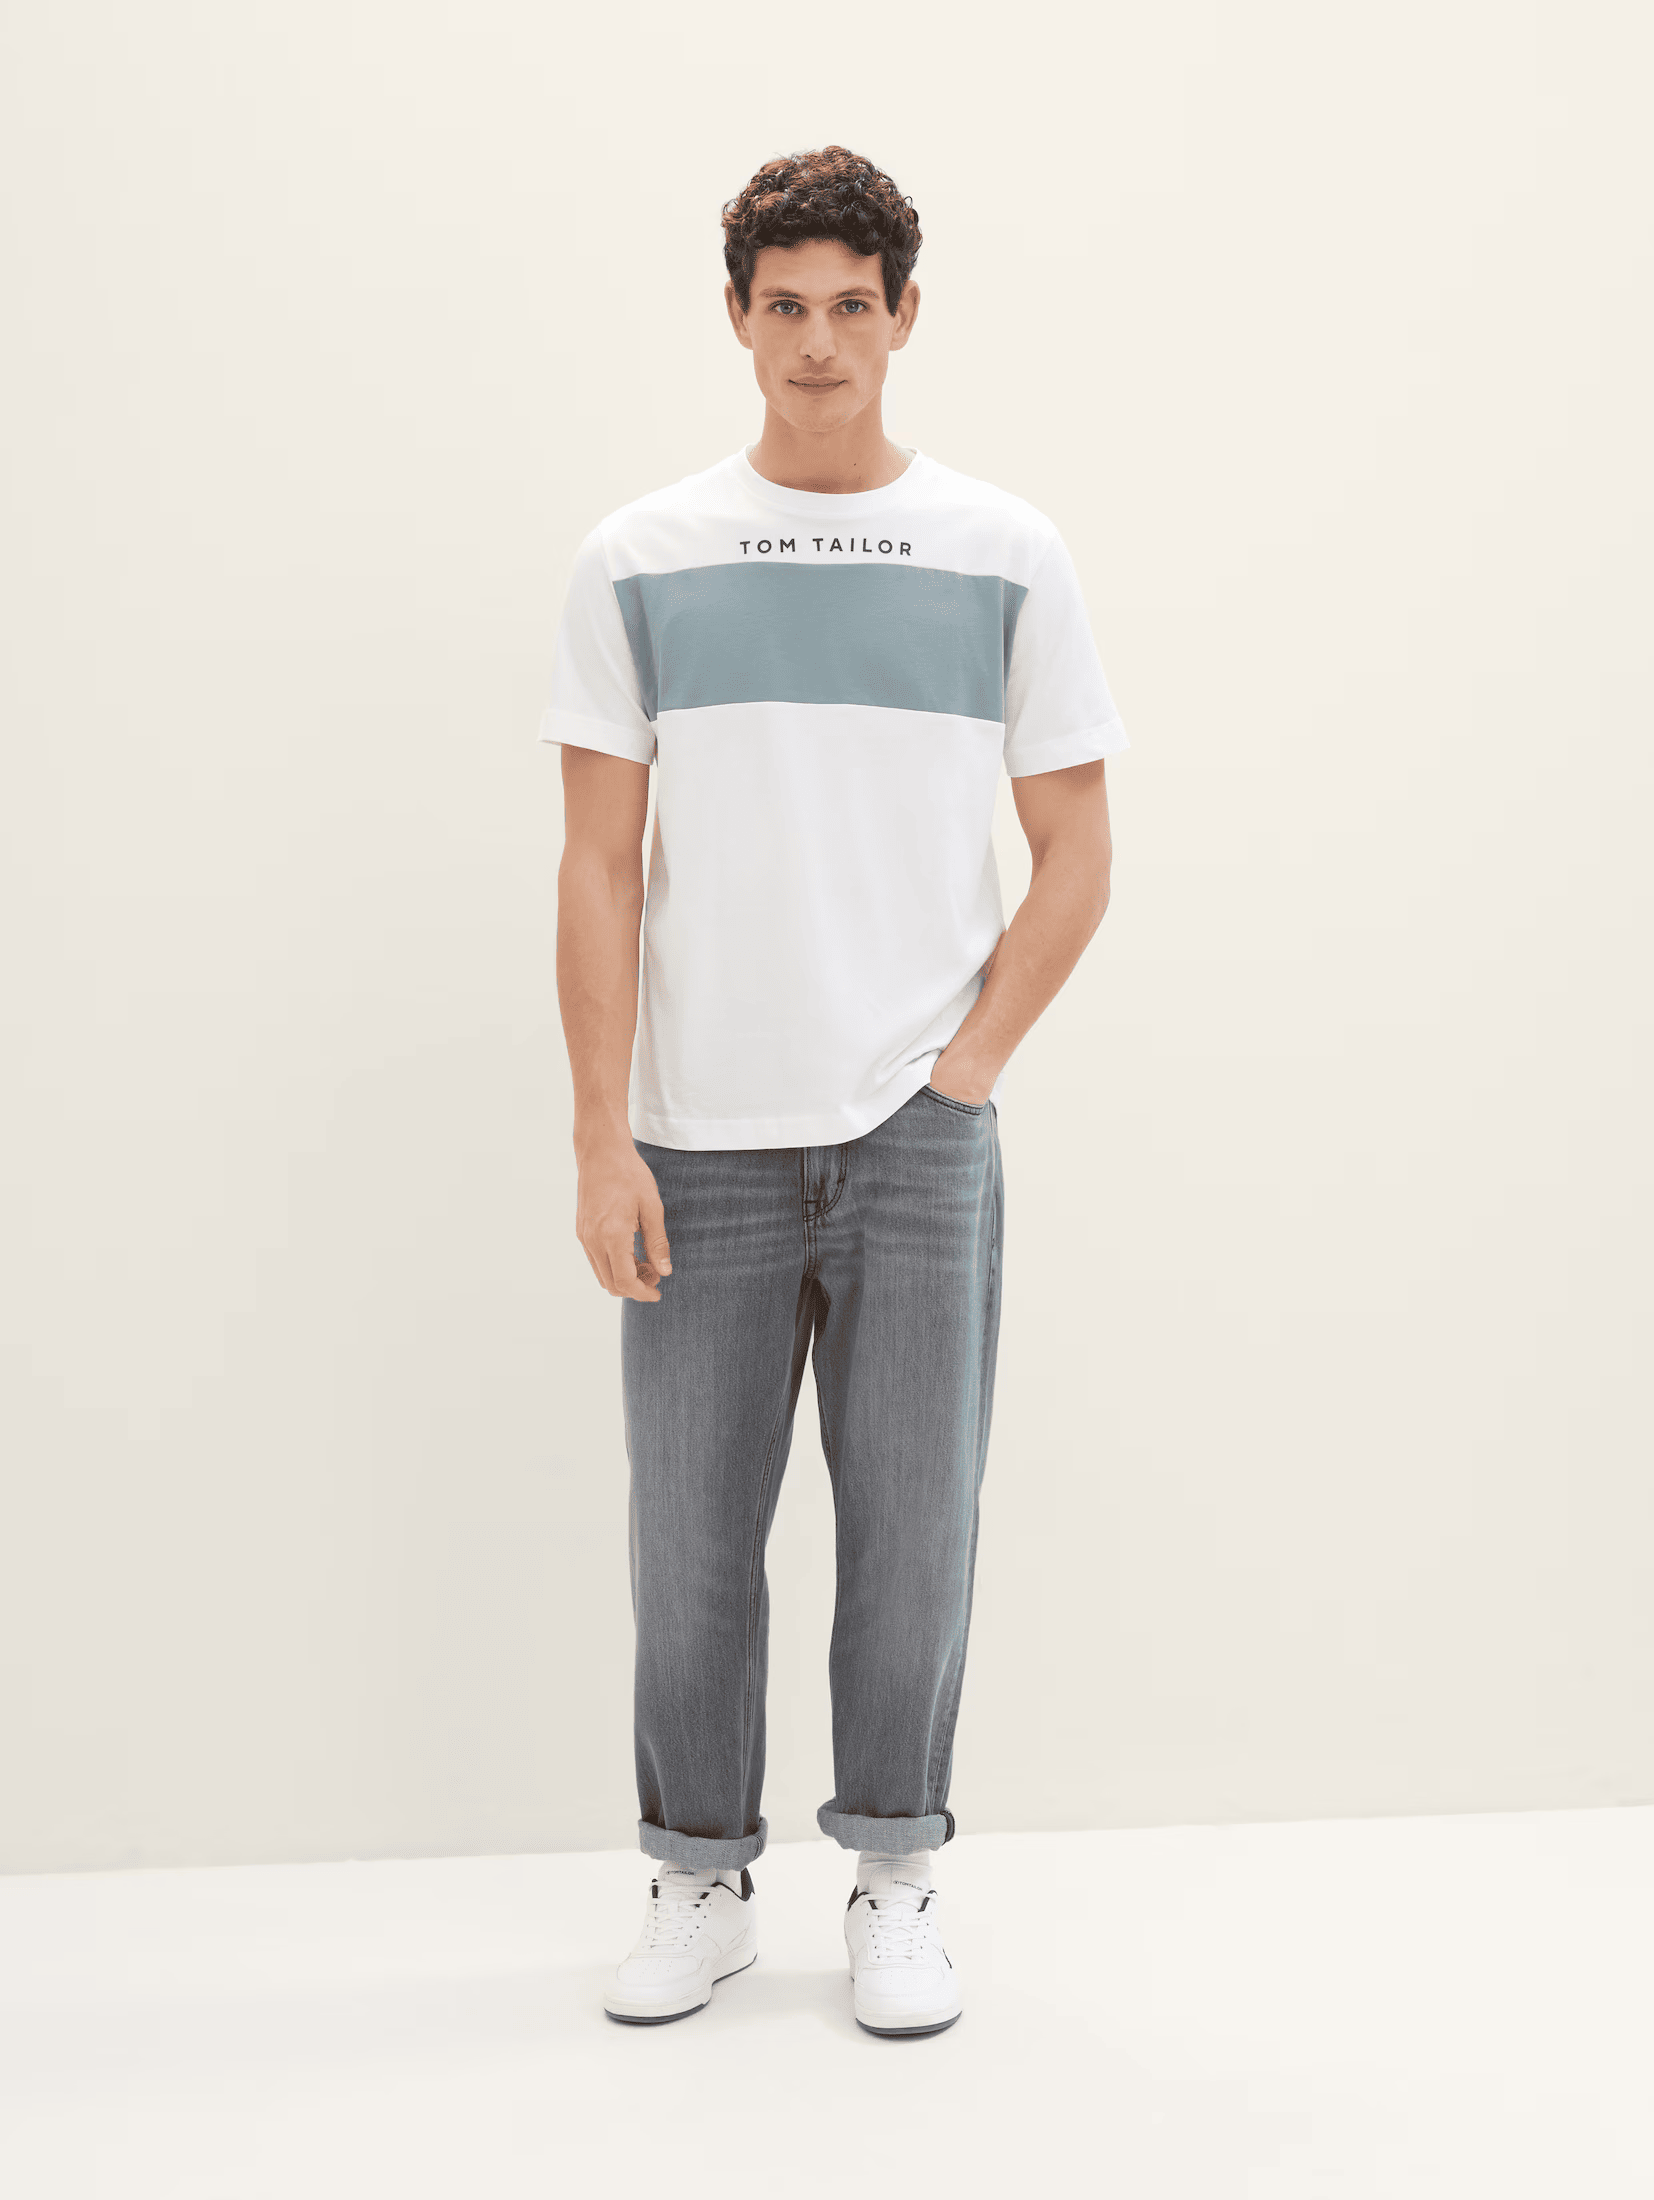 Tom Tailor White T-shirt With Color Blocking